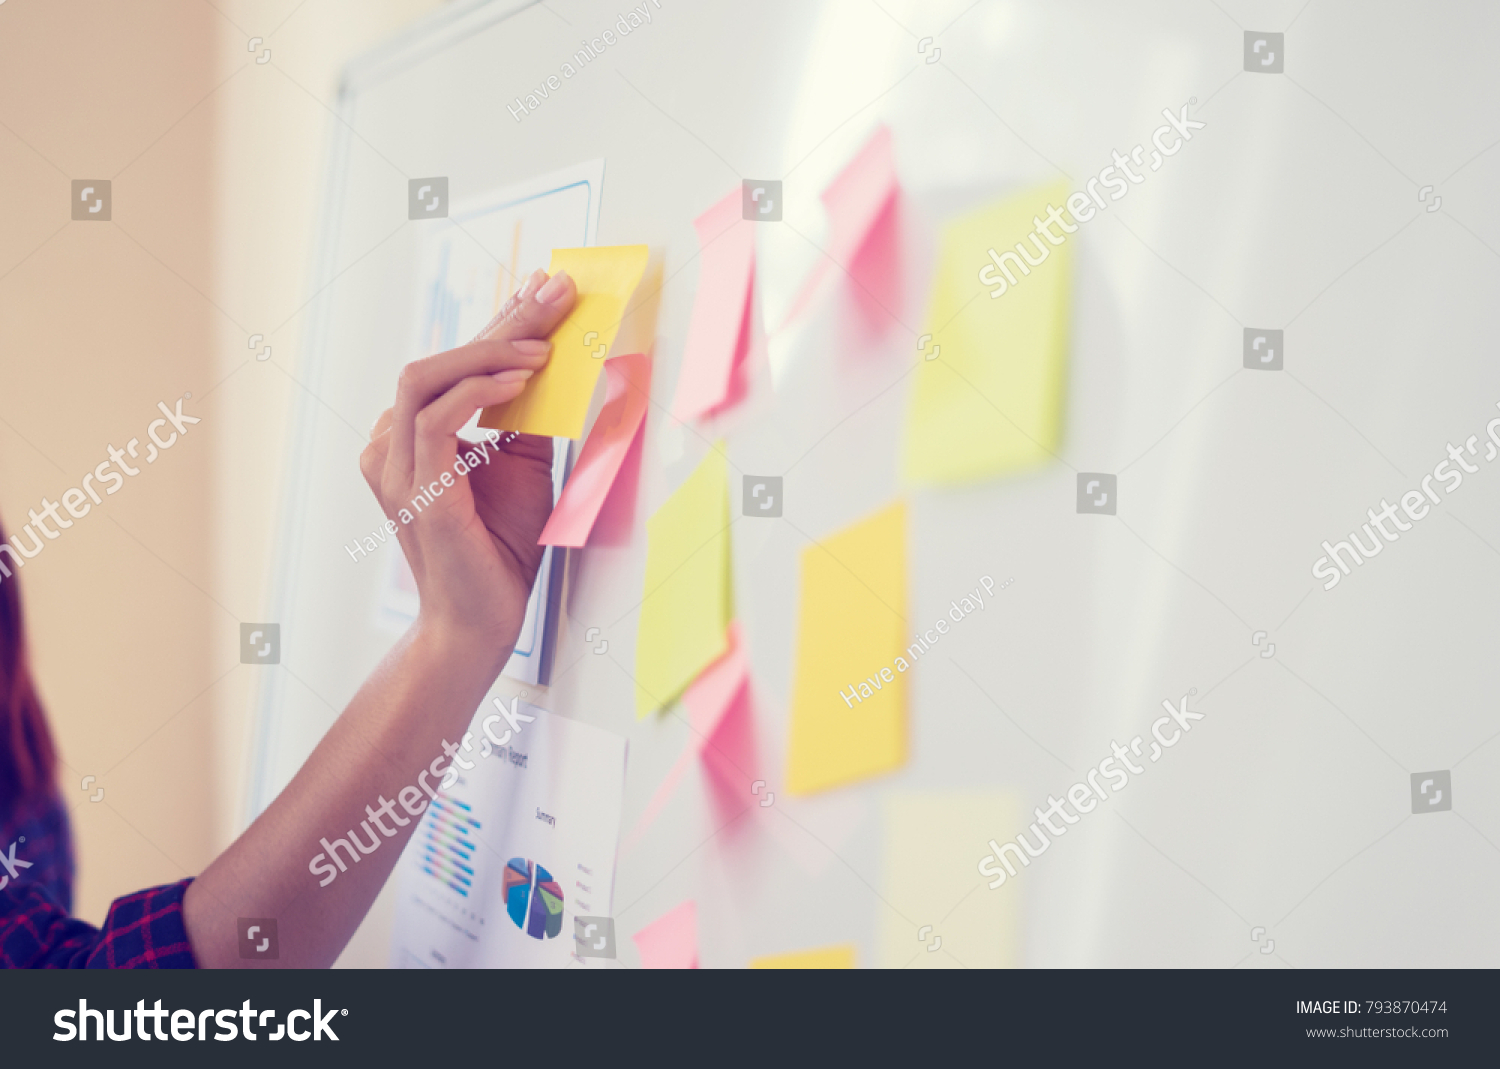 Business people meeting at office and use post it notes to share idea. Brainstorming concept. Sticky note on glass wall.business women working and communicating together in creative office #793870474